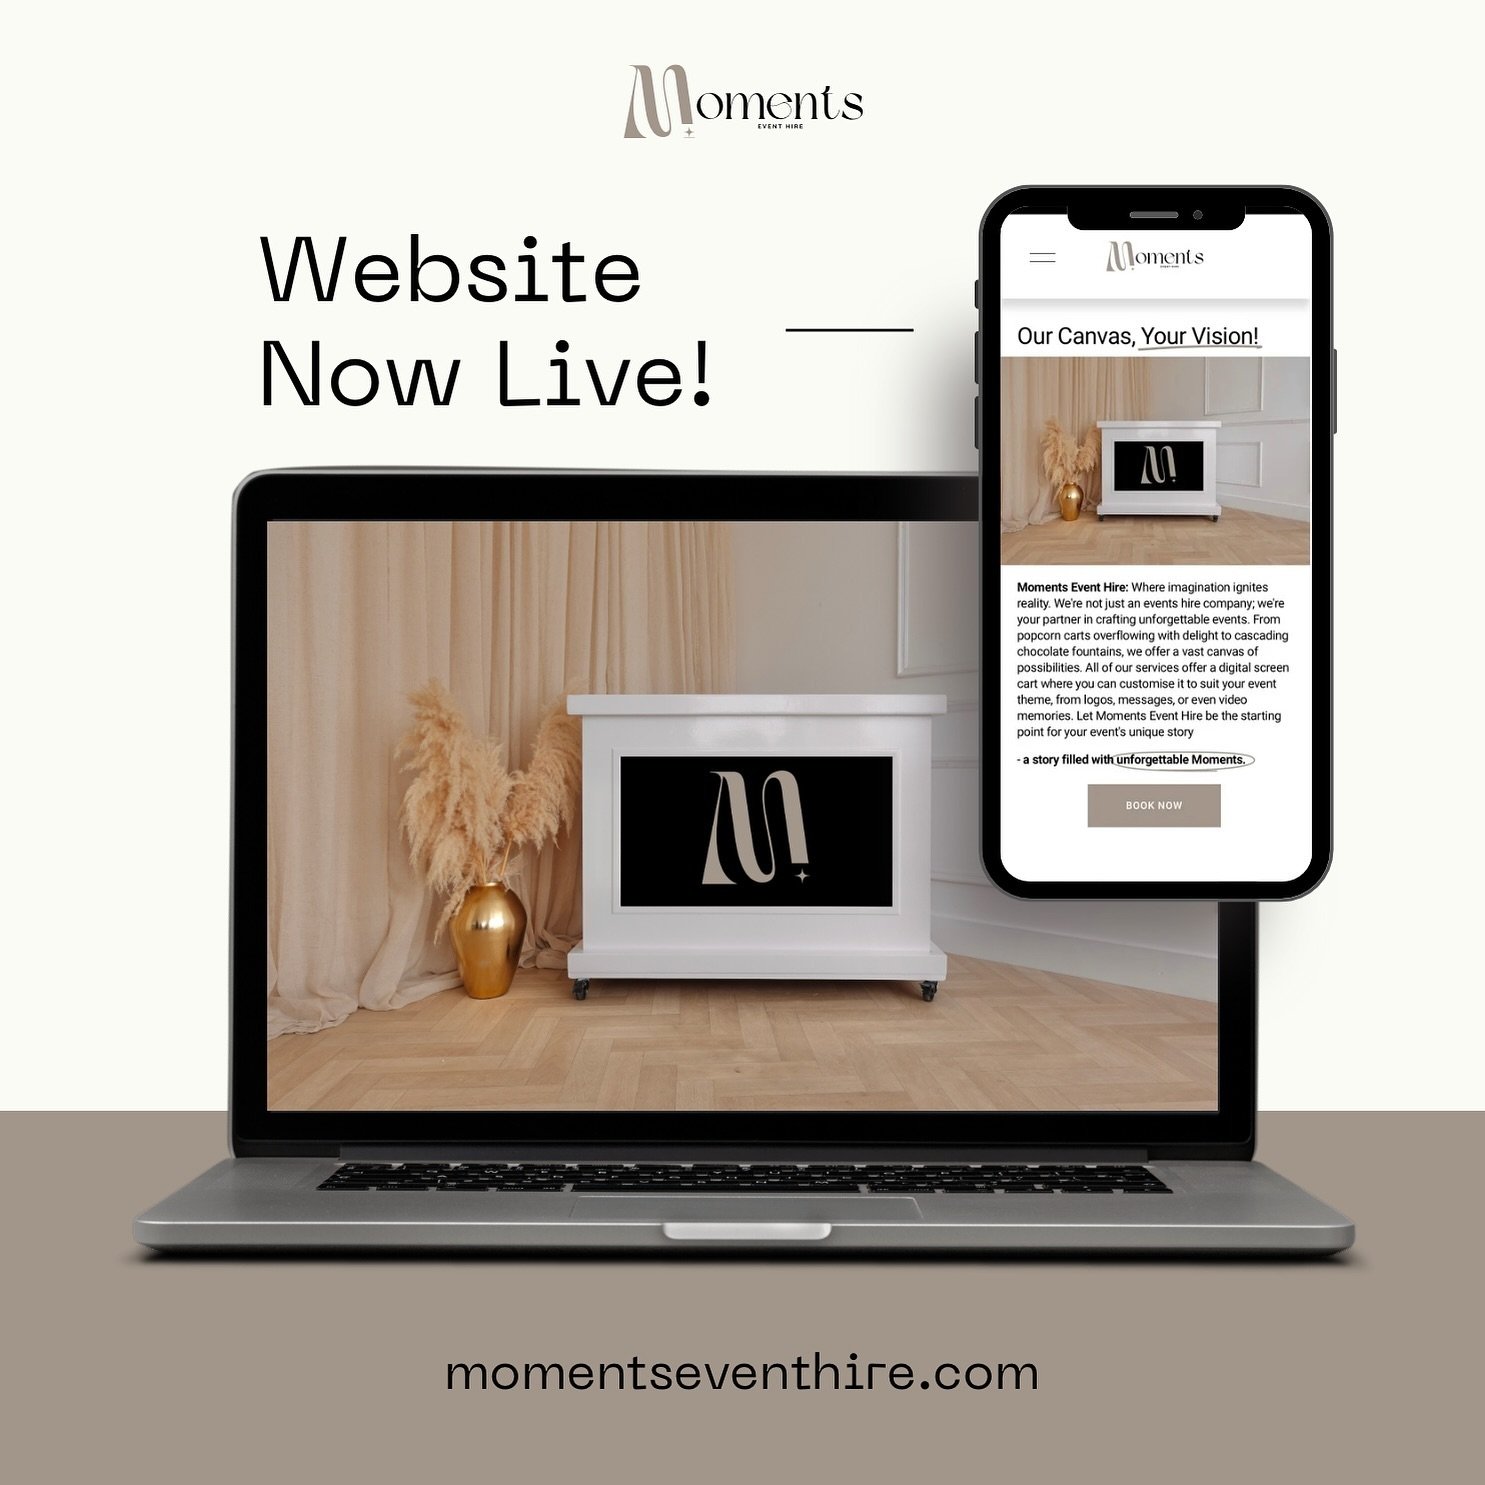 Our New Website is LIVE!!!! 🤍🎉
.
www.momentseventhire.com
.
.
.
.
.
.
#eventhire #momentseventhire